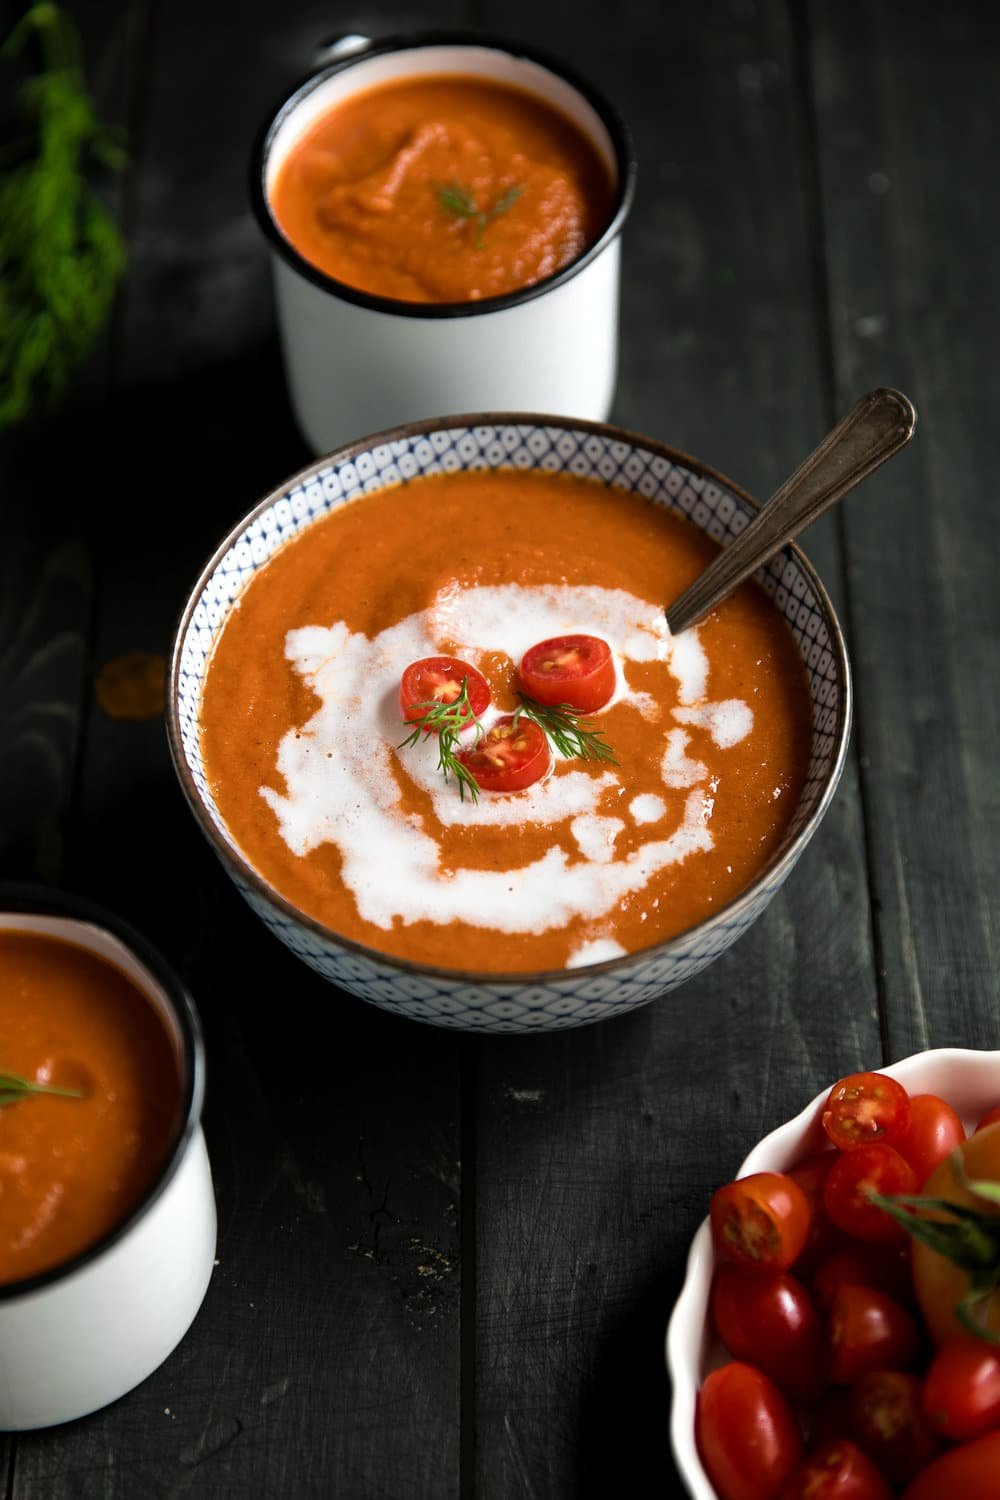 Soup bowl and two white mugs filled with roasted red pepper and tomato soup garnished with heavy cream and fresh cherry tomatoes.